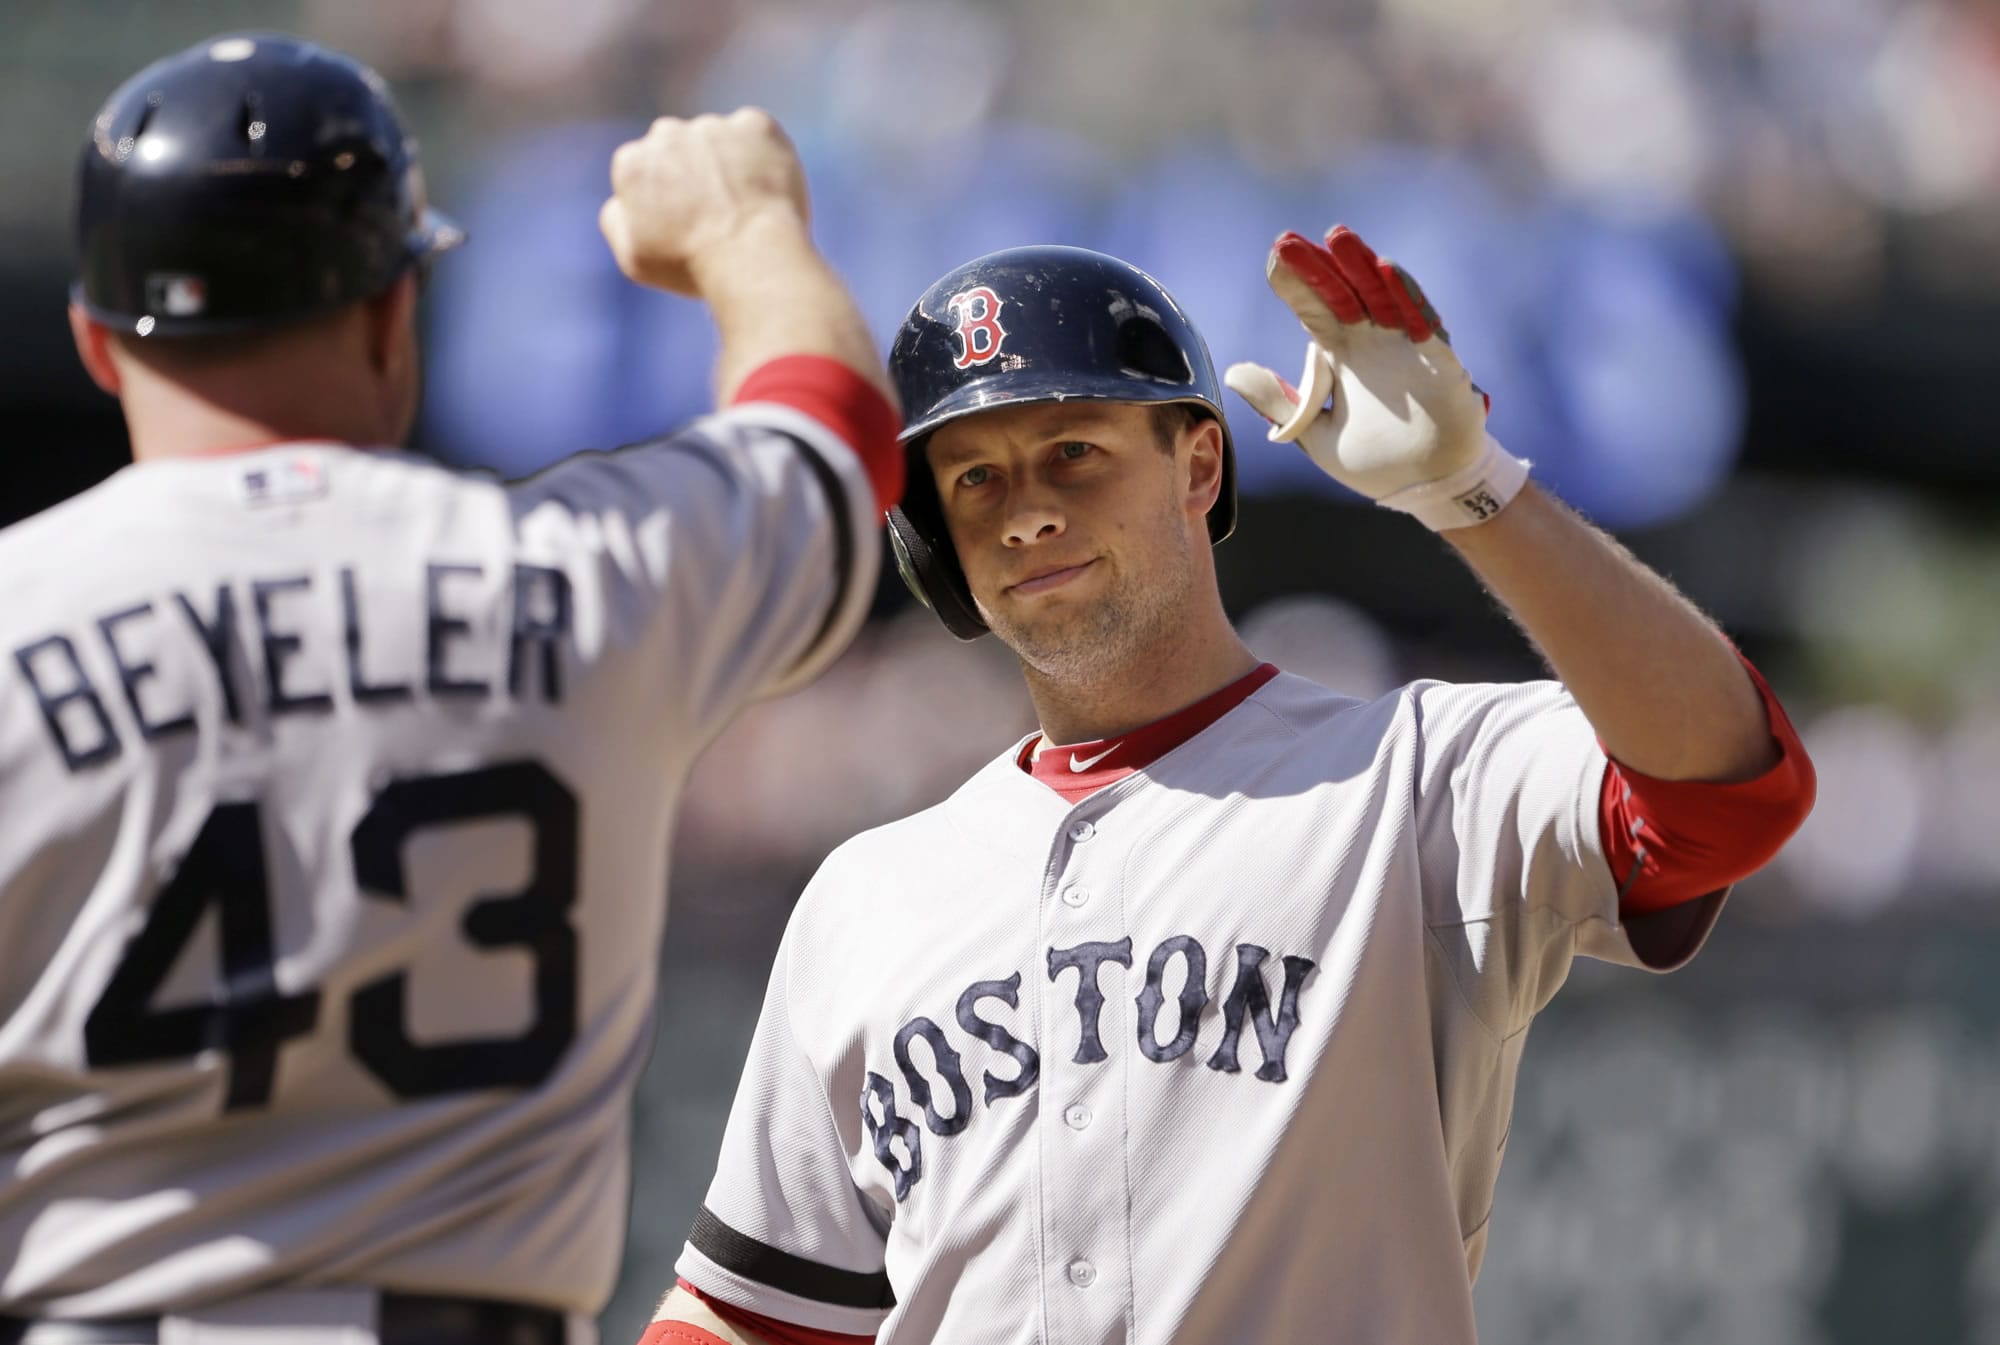 Boston Red Sox's Daniel Nava, right, is congratulated by first base coach Arnie Beyeler after hitting an RBI-single against the Seattle Mariners in the 10th inning Thursday.